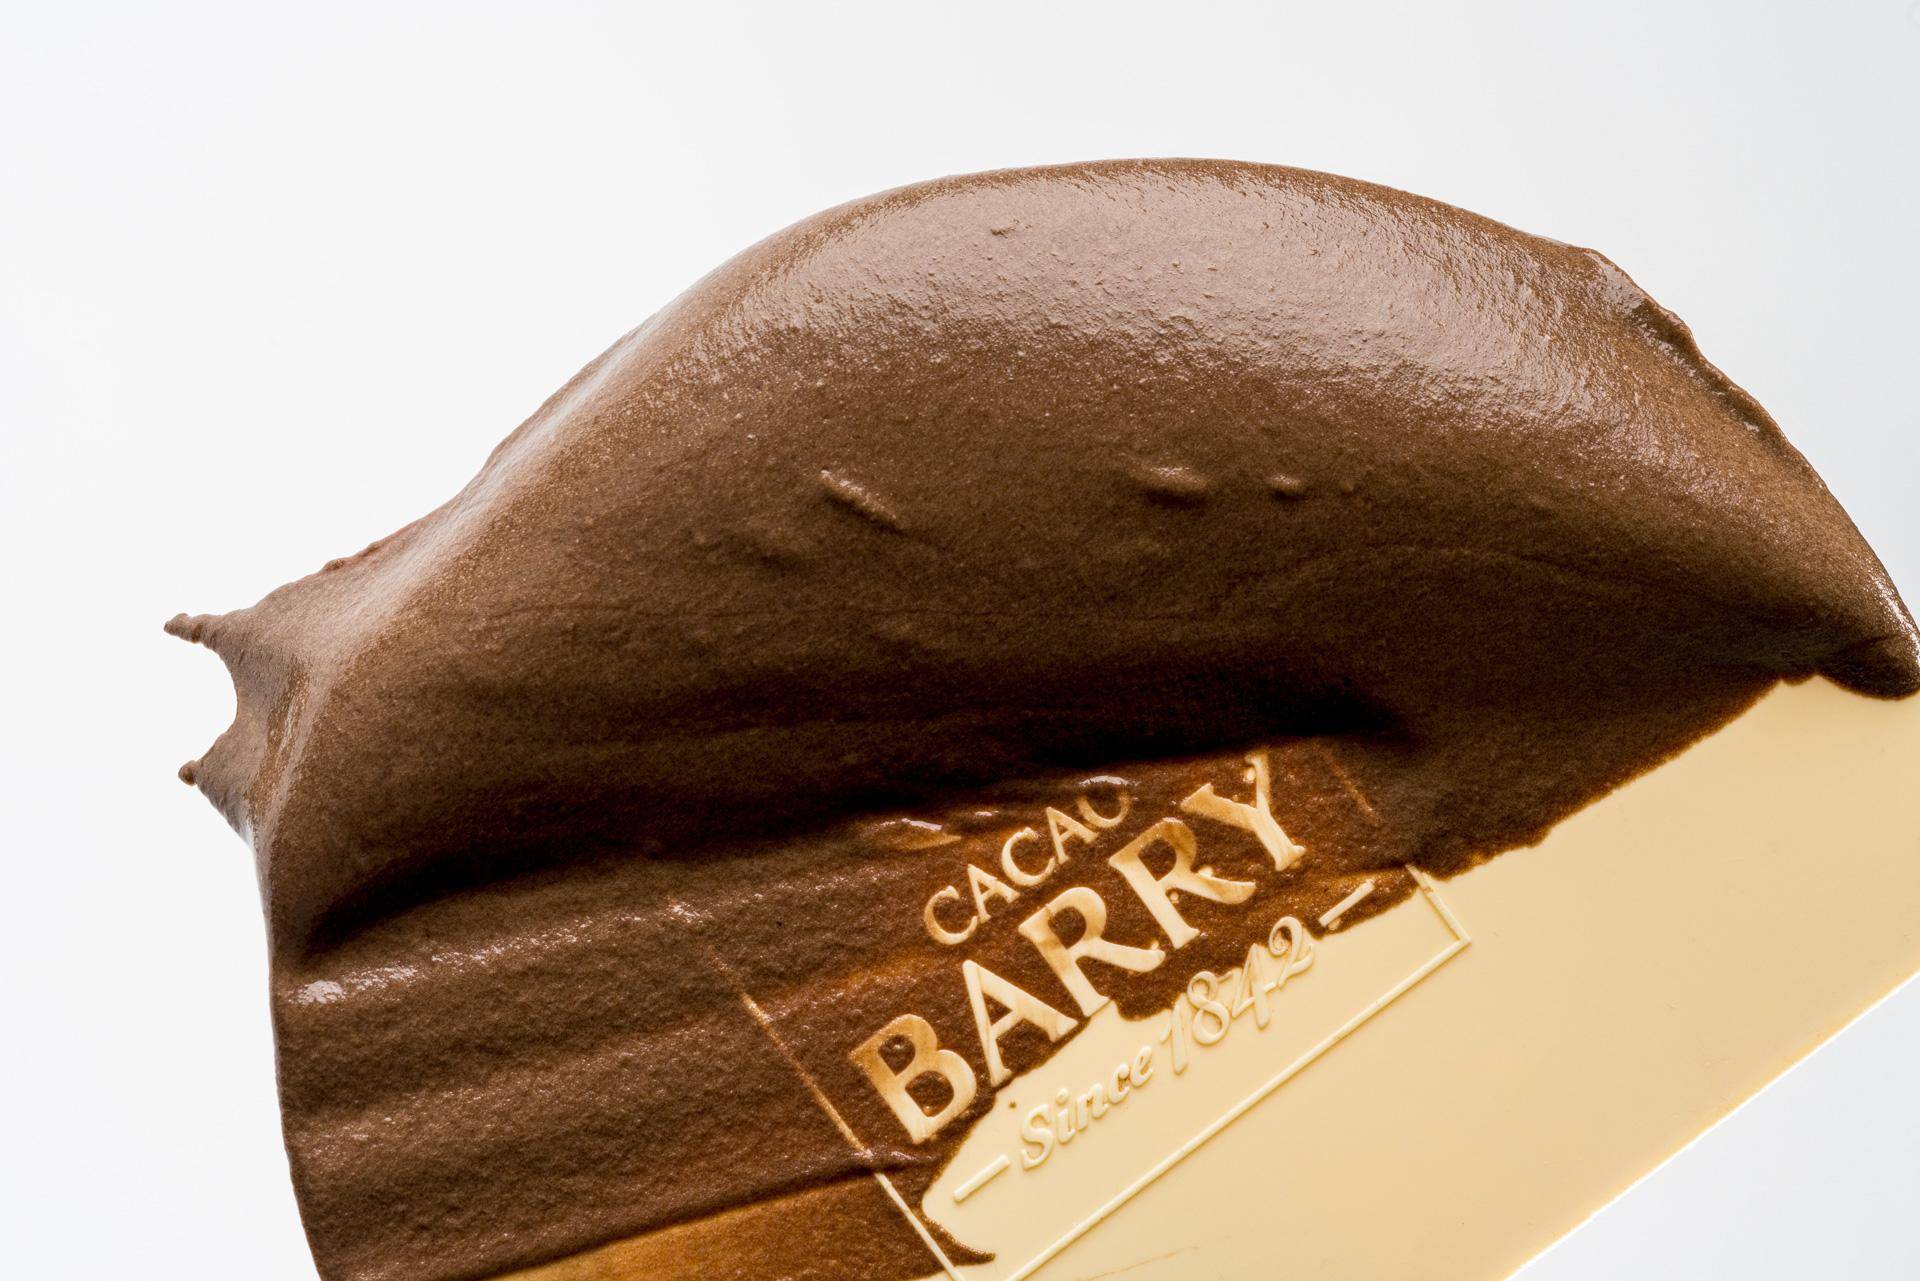 cacao barry chocolate mousse